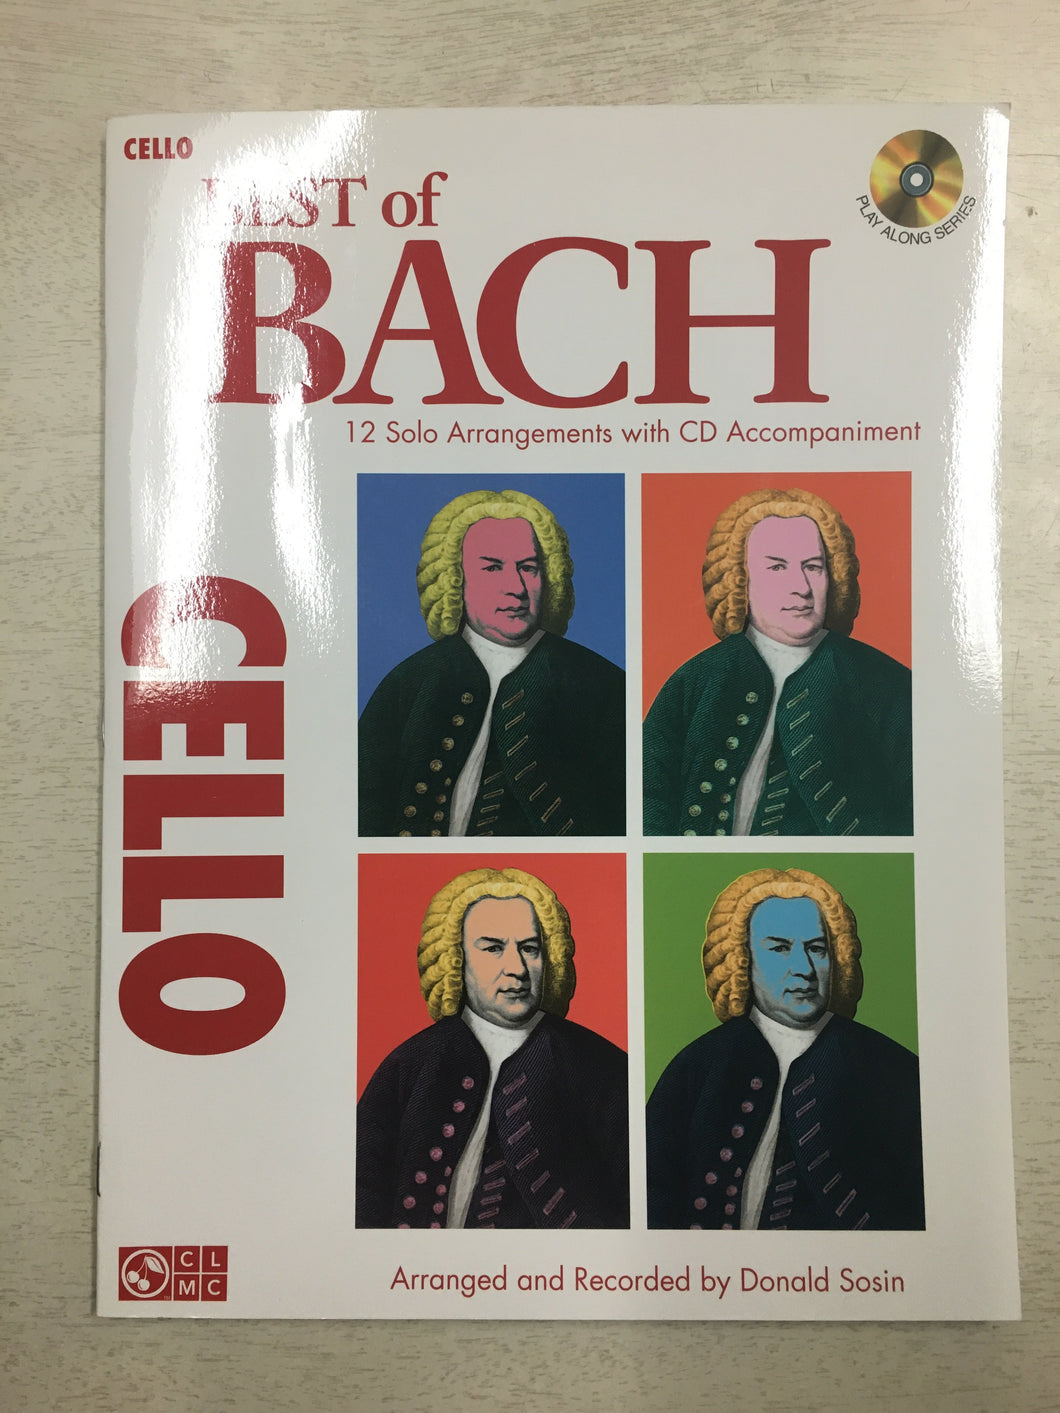 Best of Bach with CD - Cello